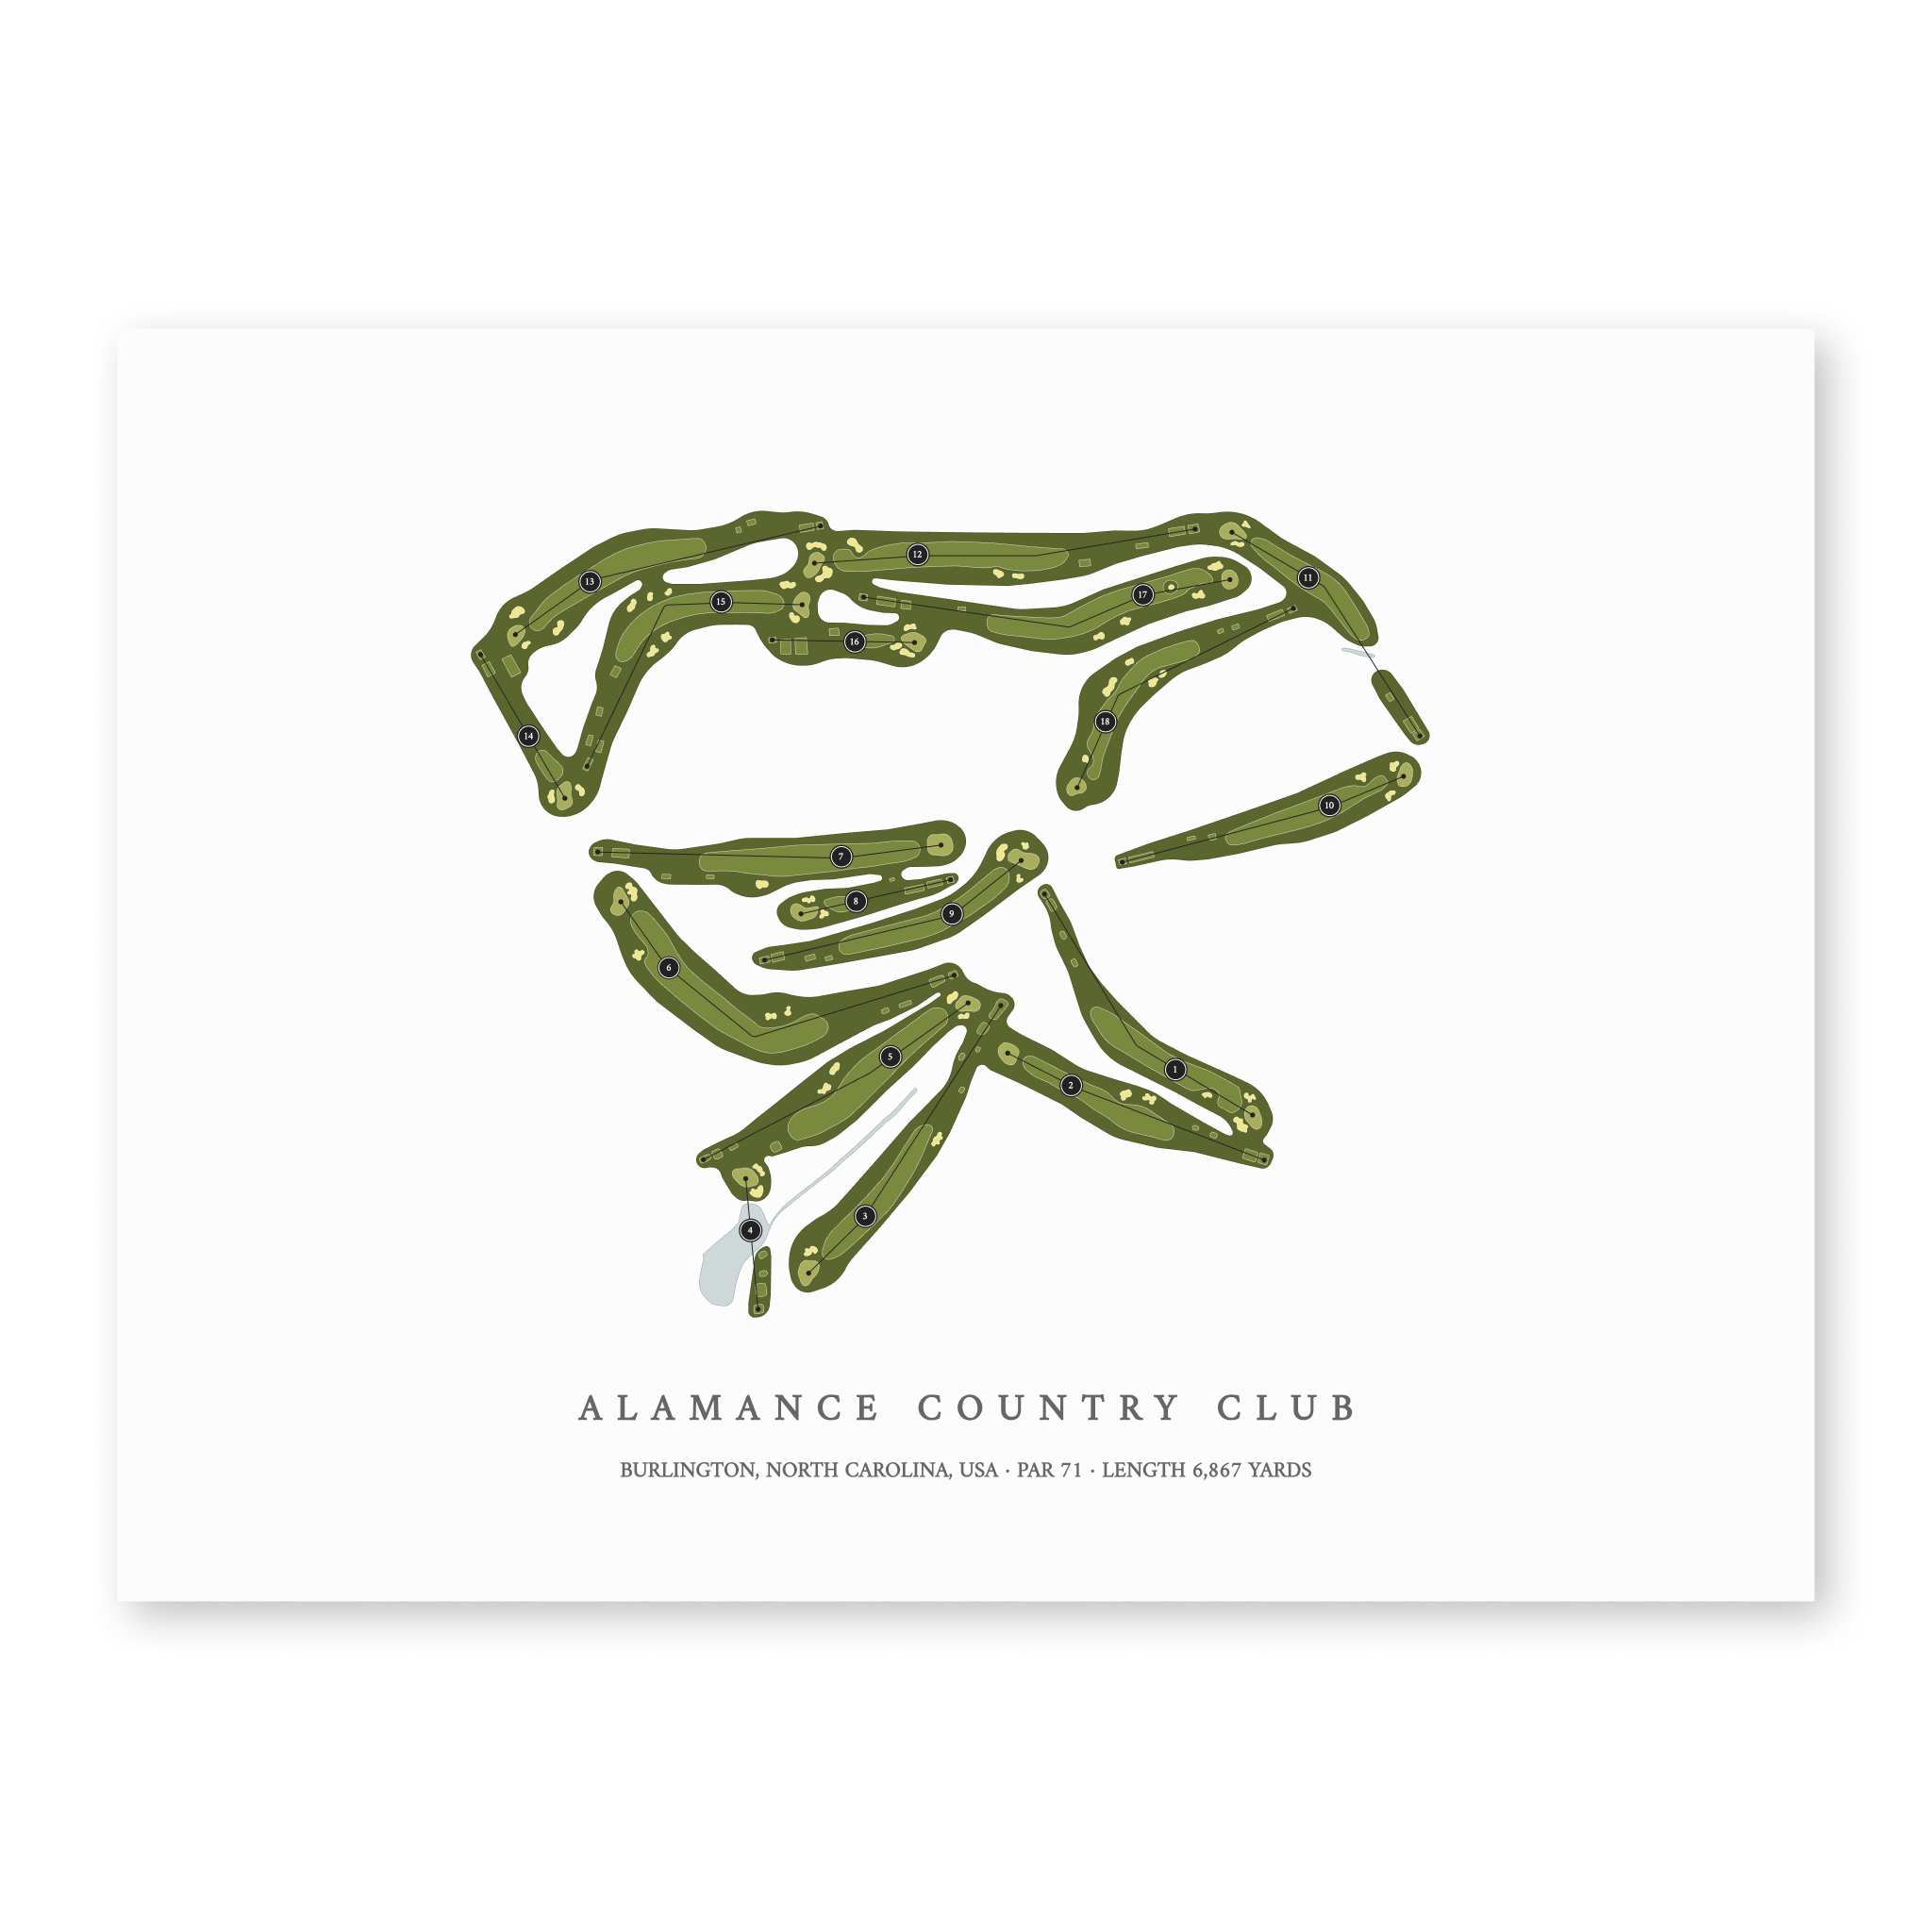 Alamance Country Club | Golf Course Map | Unframed With Hole Numbers #hole numbers_yes